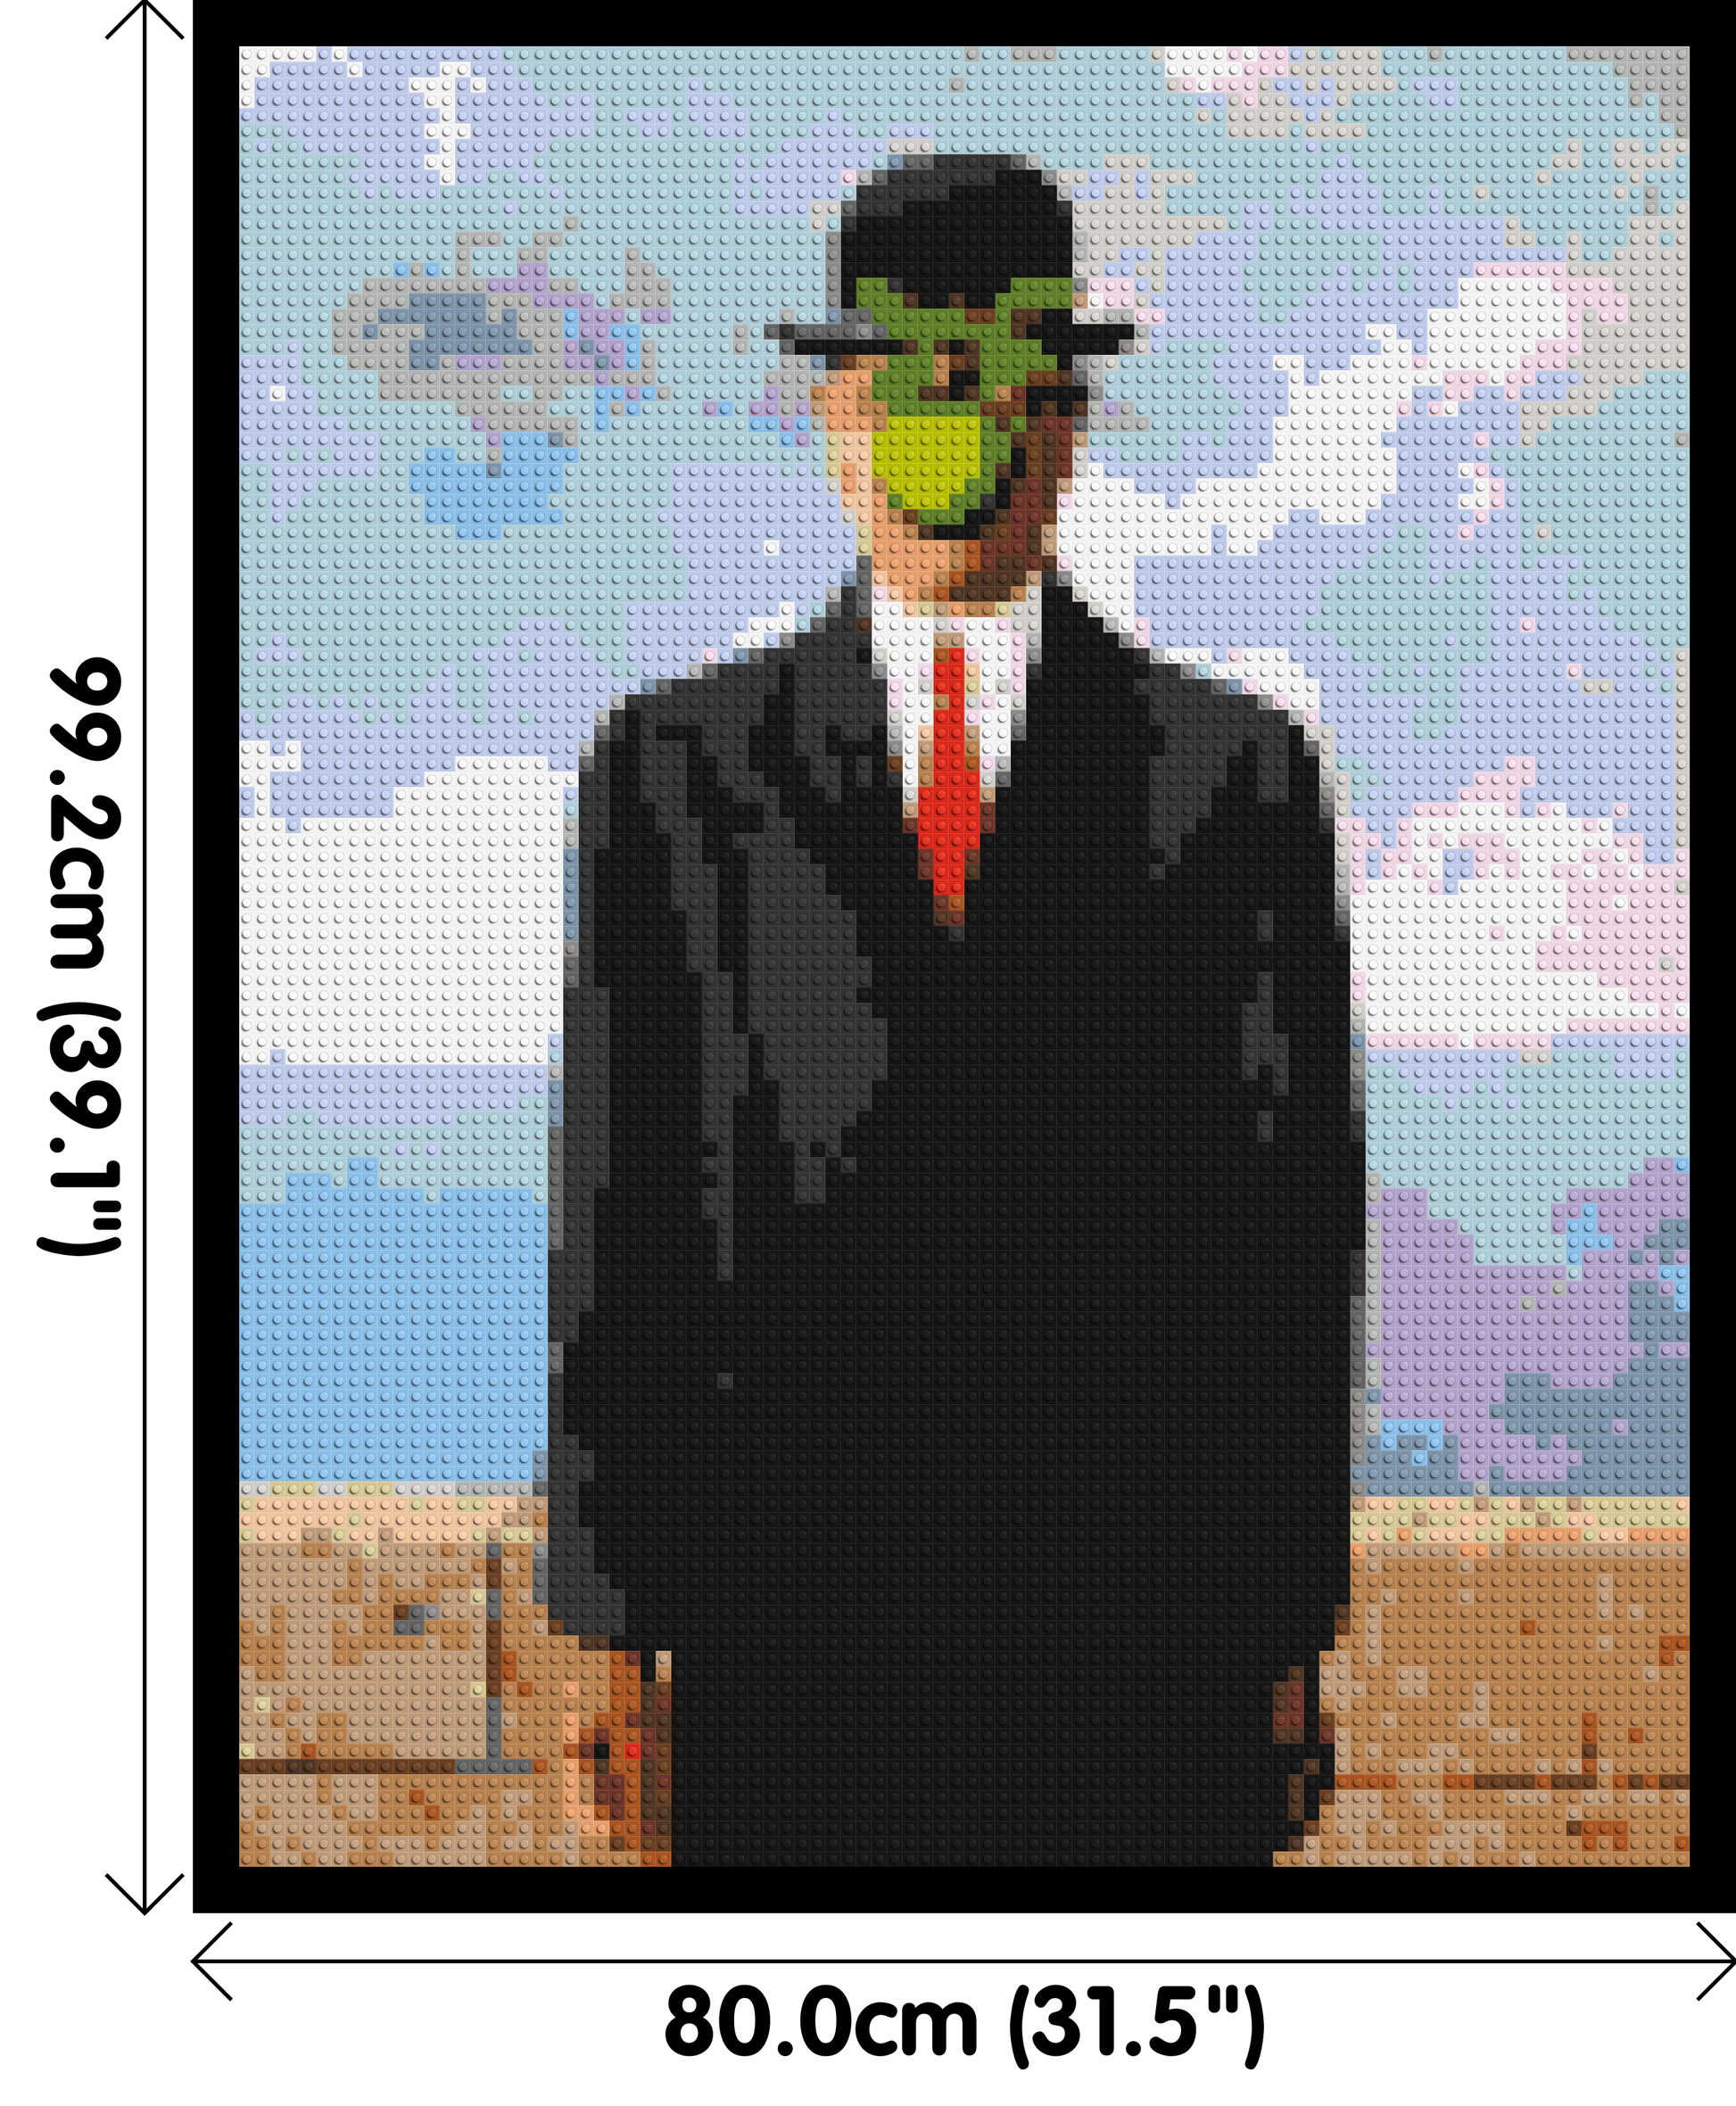 The Son of Man by René Magritte - Brick Art Mosaic Kit 4x5 dimensions with frame